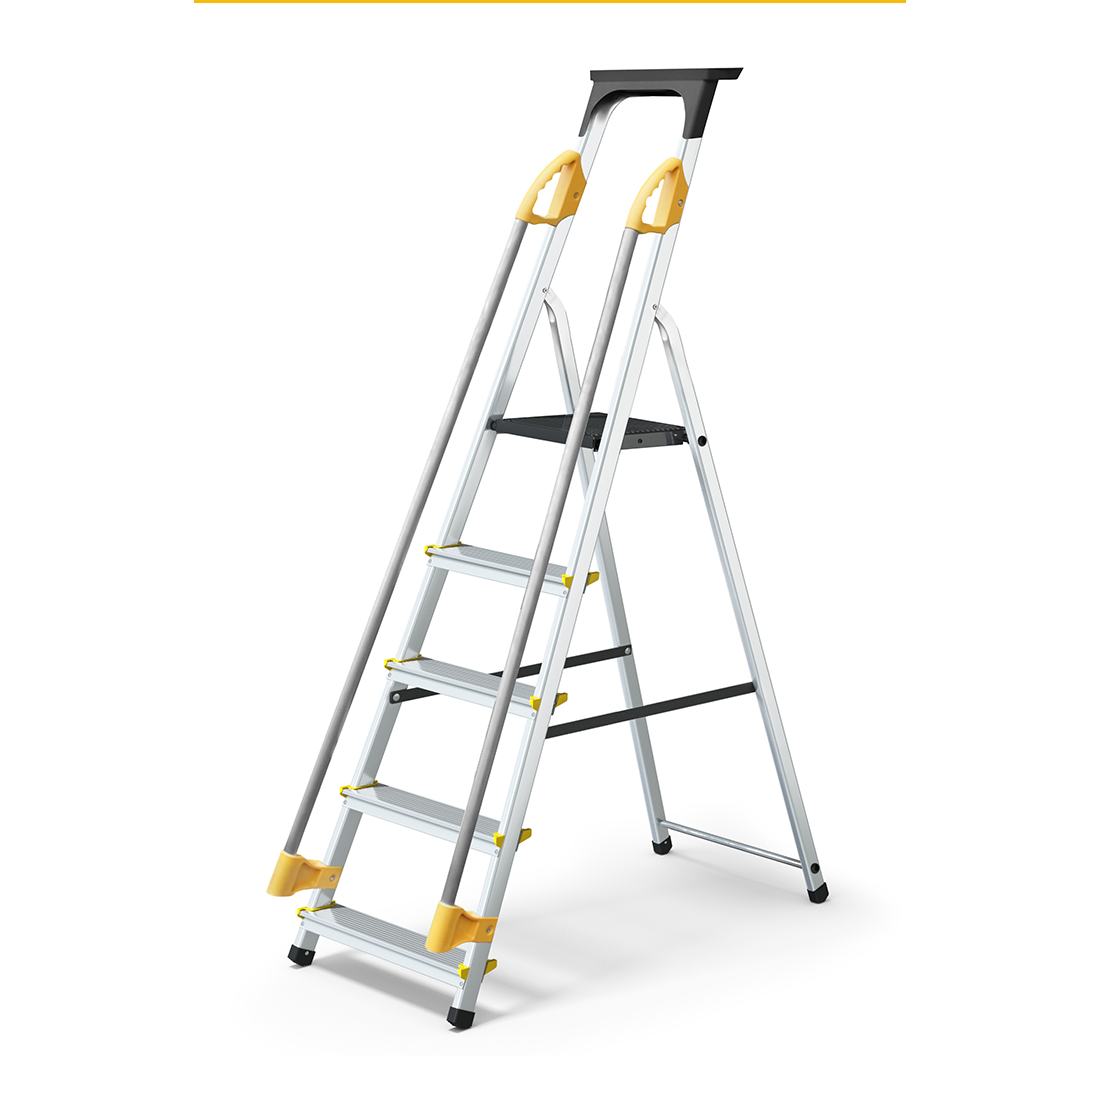 9.5 ft. Reach SafeStep Type IA Aluminum Platform Ladder With Handrail And Tool Tray - 330 lbs. Load Capacity